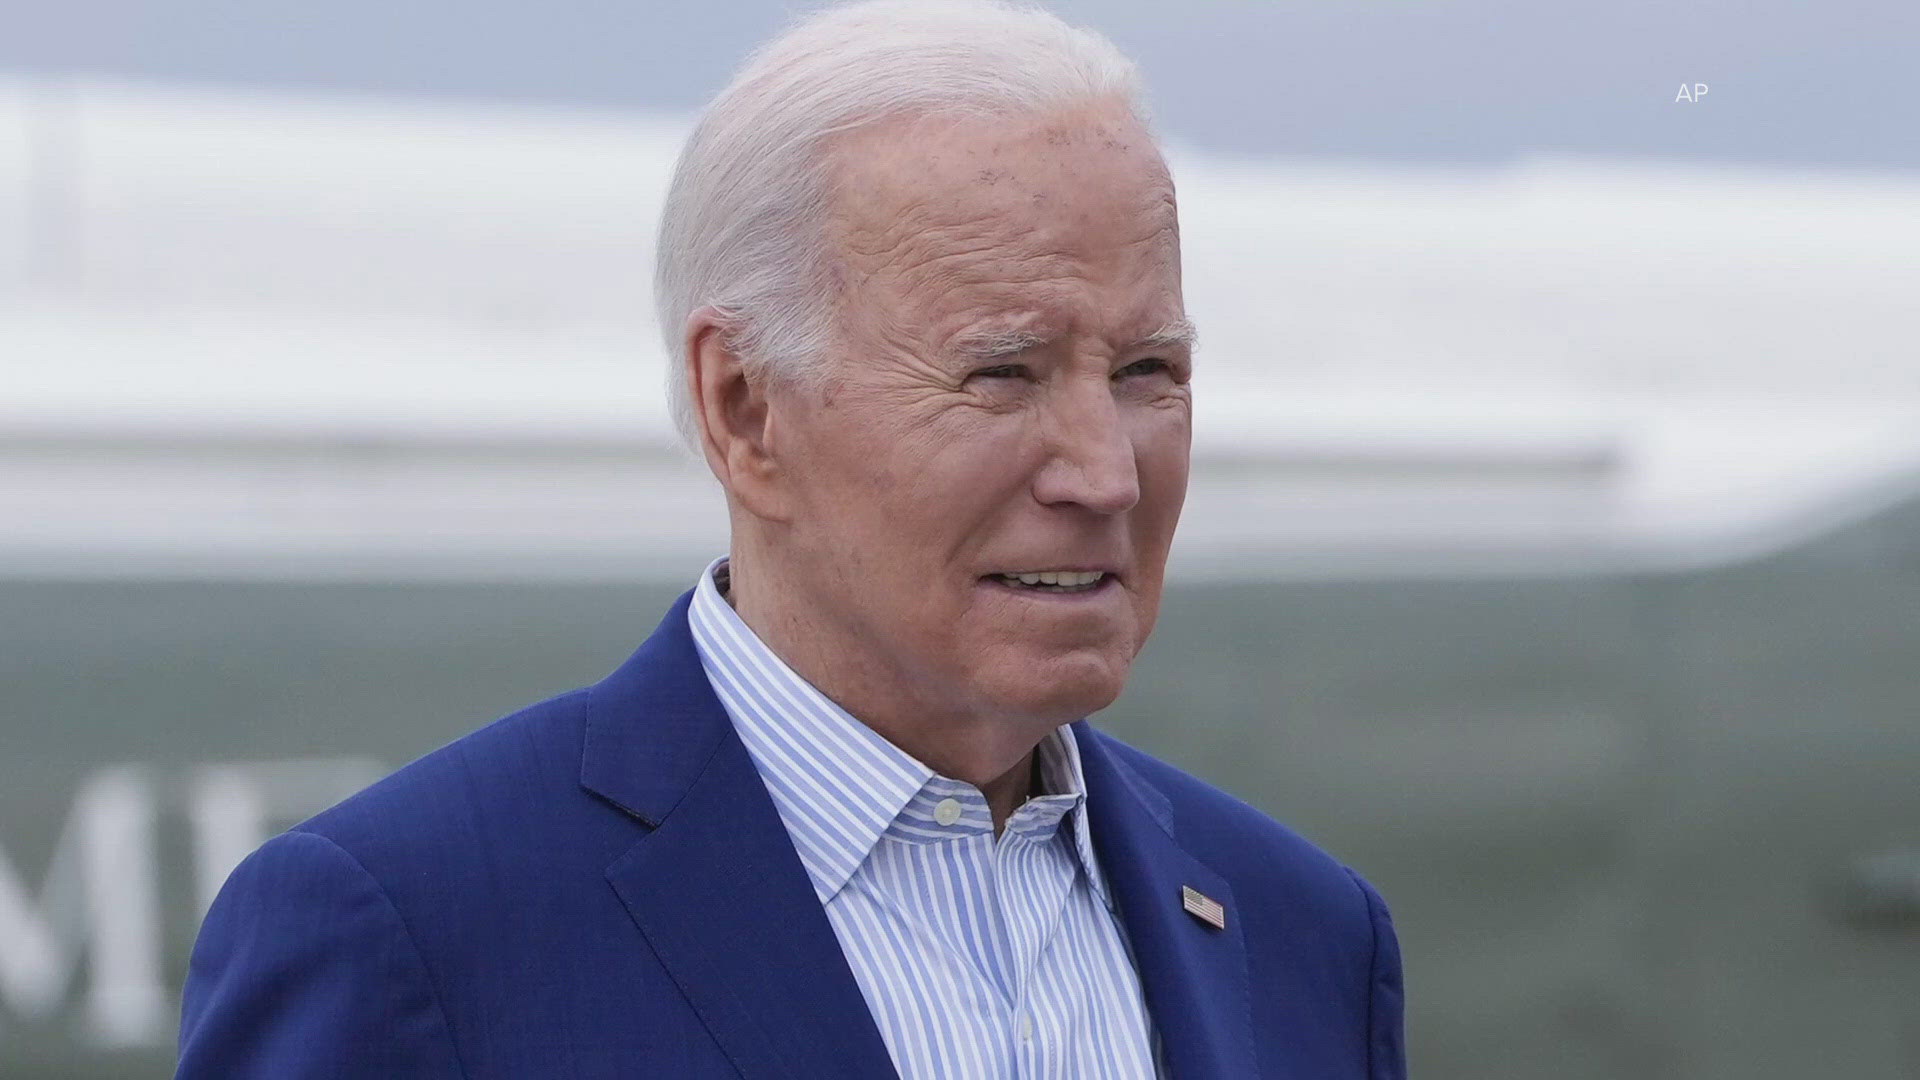 Joe Biden's campaign is adamant that he will be on the ballot in Ohio come November.